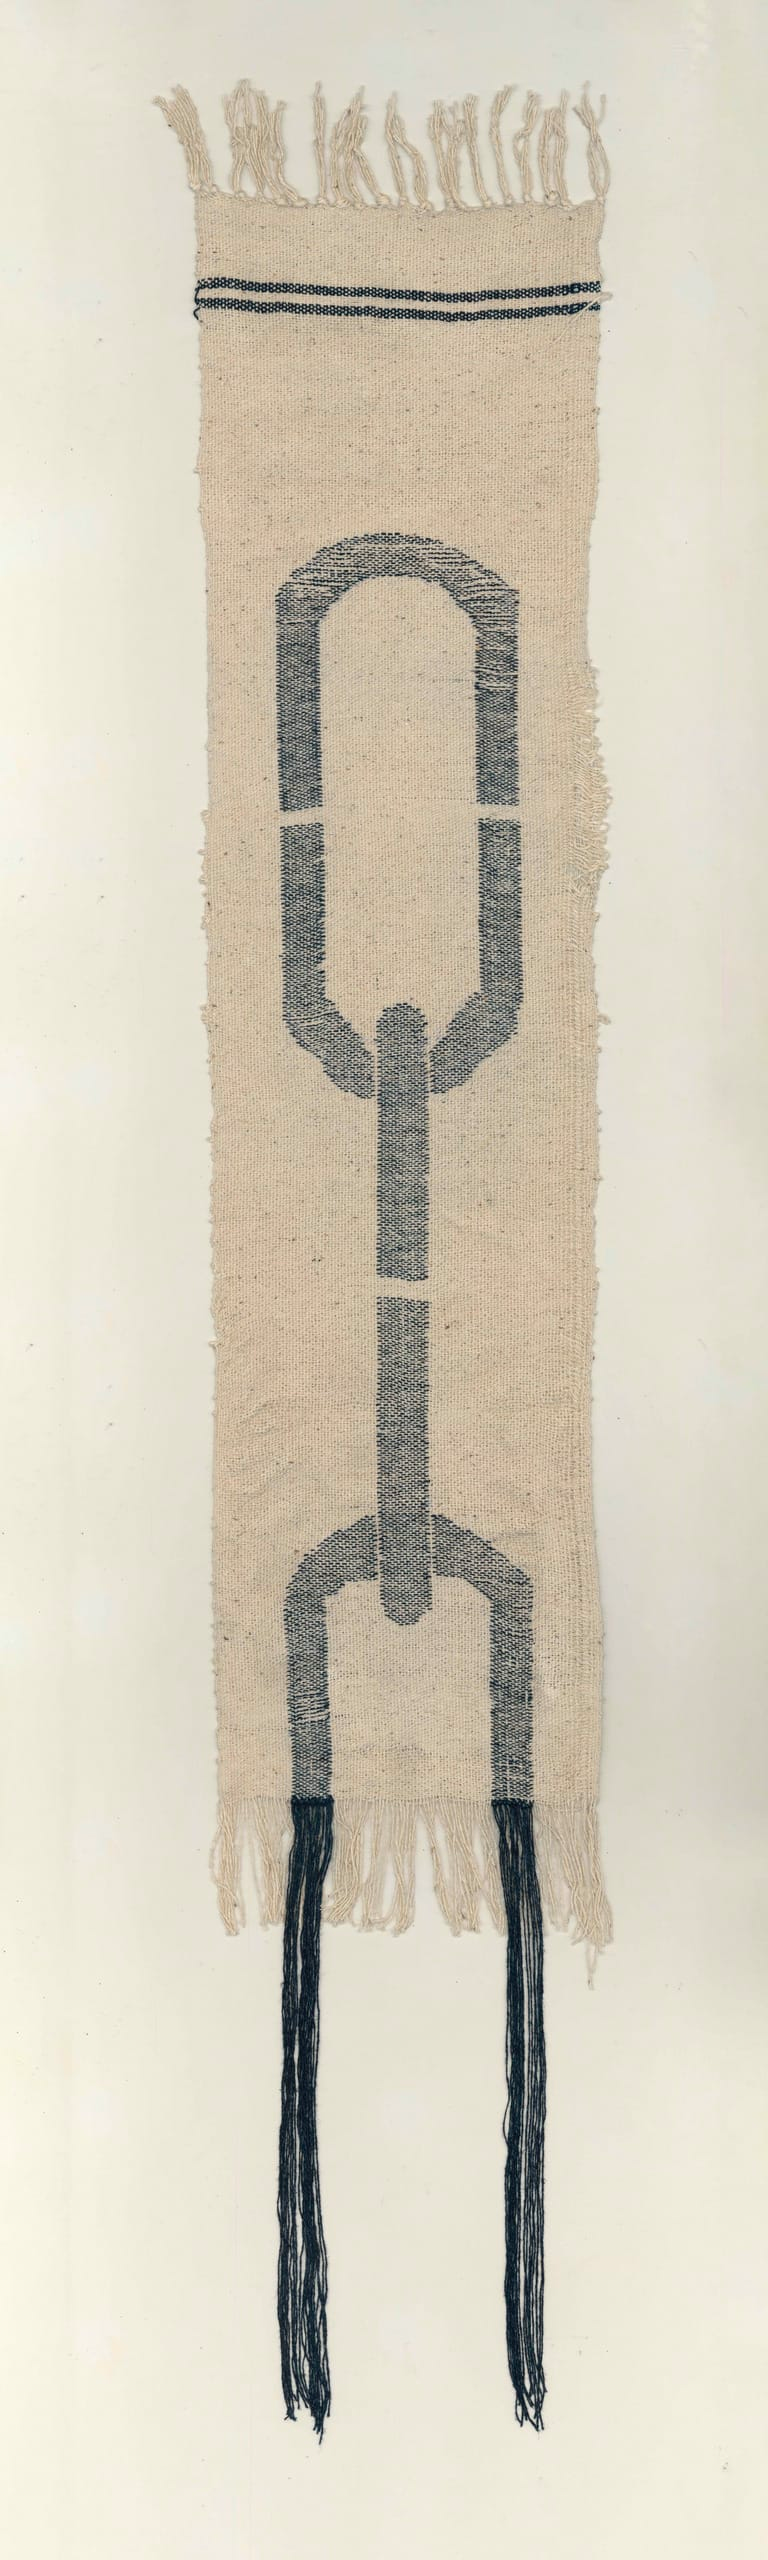 A photograph of a beige knitted or woven length of tasselled fabric, featuring a large black chain-like design, with one link open at the edge of the fabric, its ends trailing as two long tassels. 